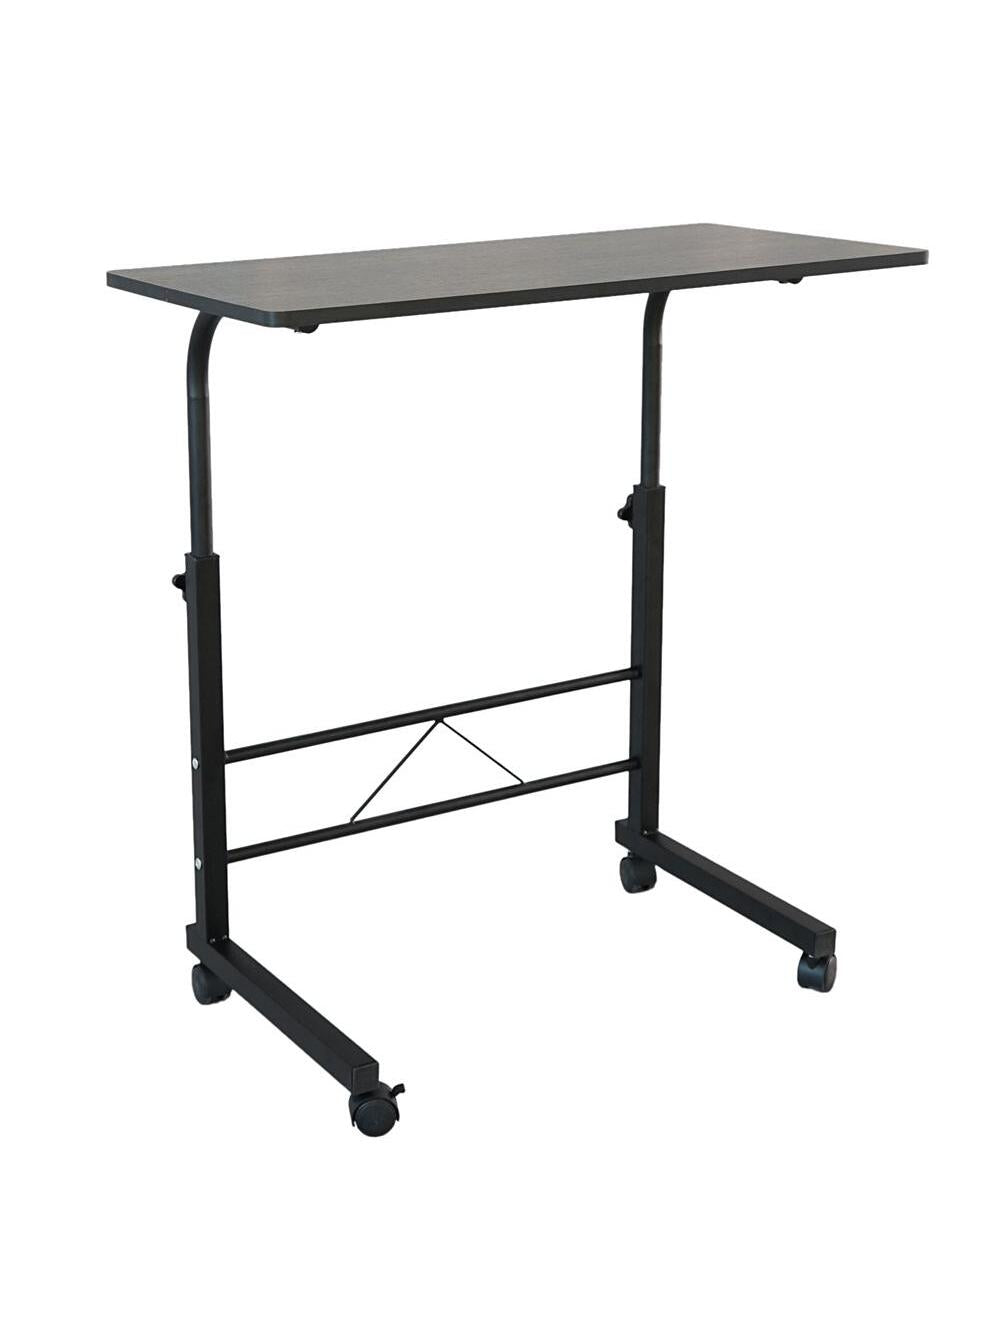 Elegant Black Side Table featuring Durable P2 Chipboard and Steel Construction, 15MM Thickness